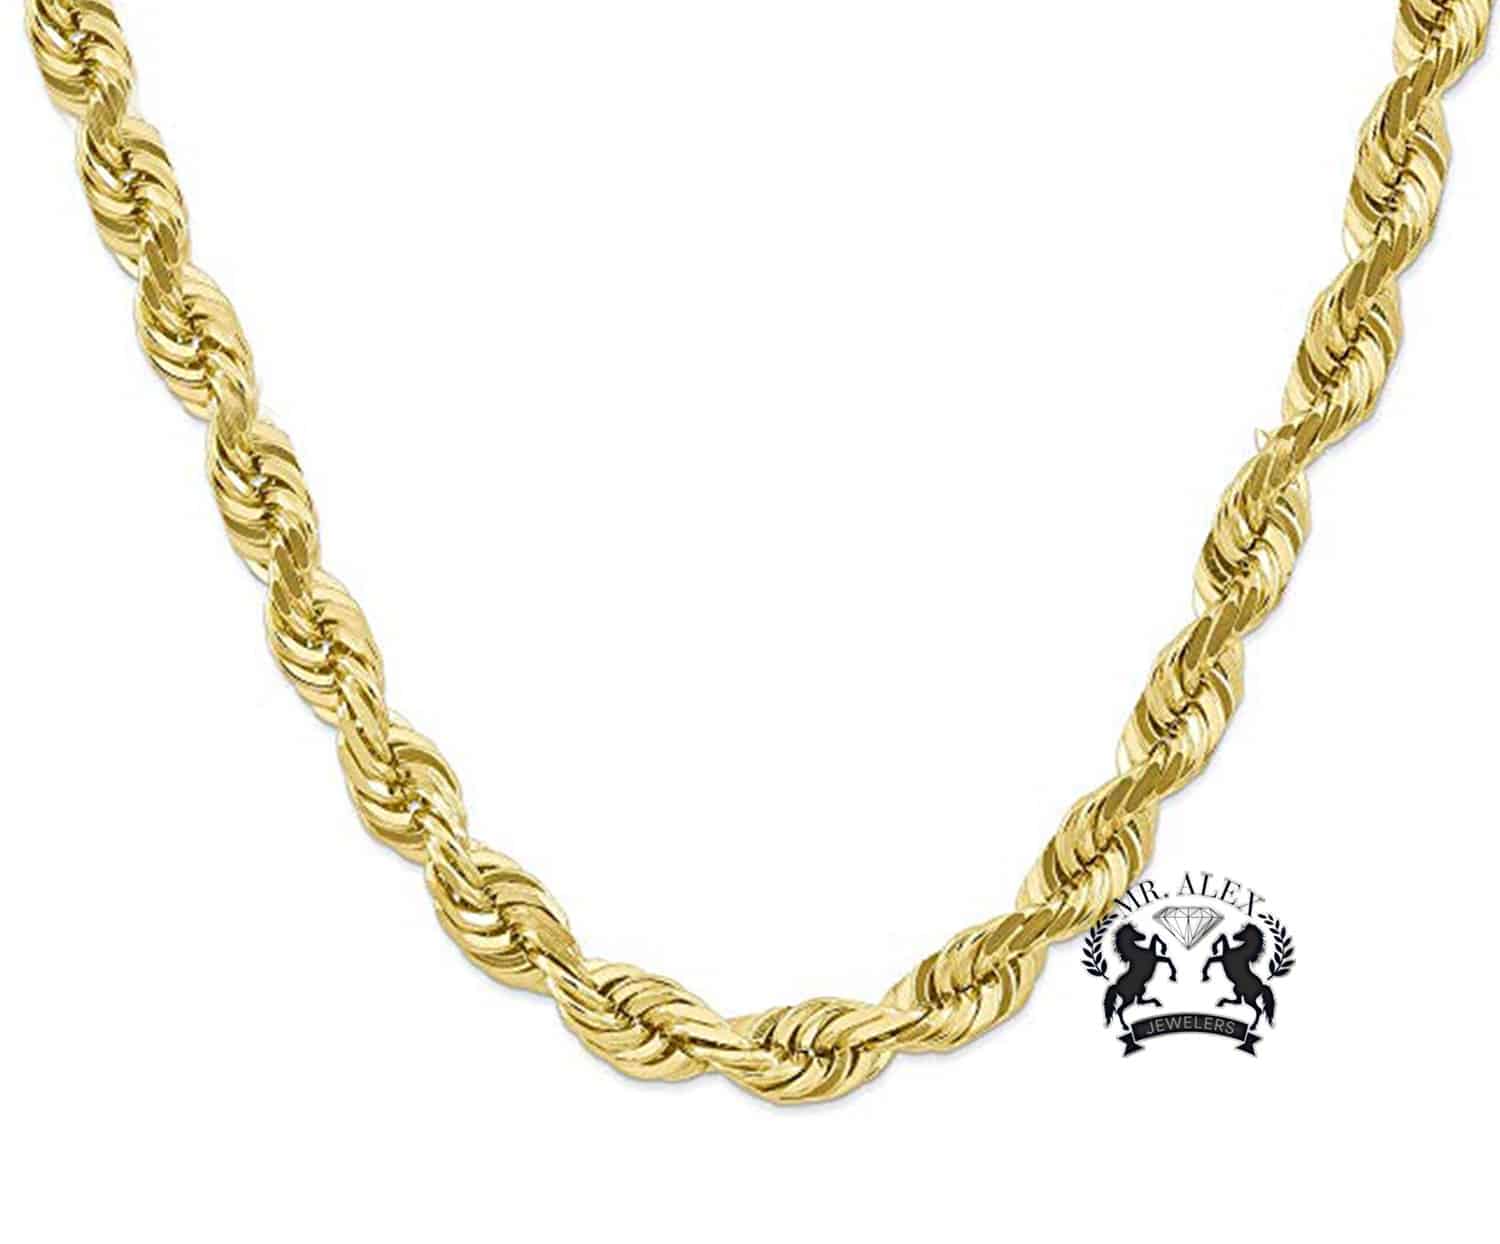 10K Hollow Rope Chain Yellow Gold - Mr. Alex Jewelry